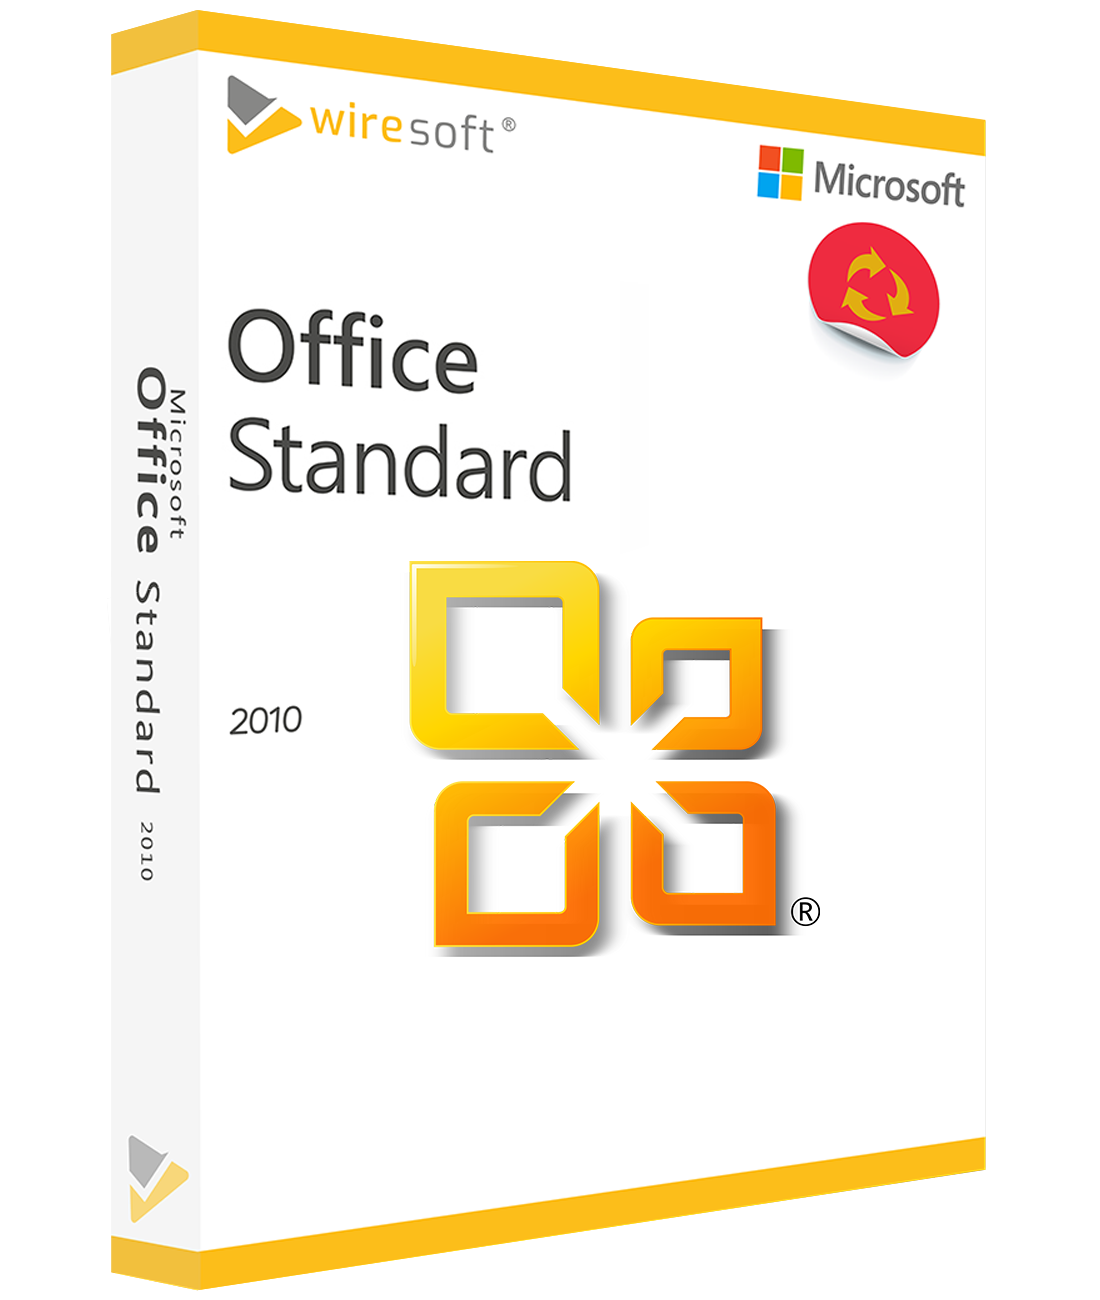 microsoft office 2010 software free download full version with key